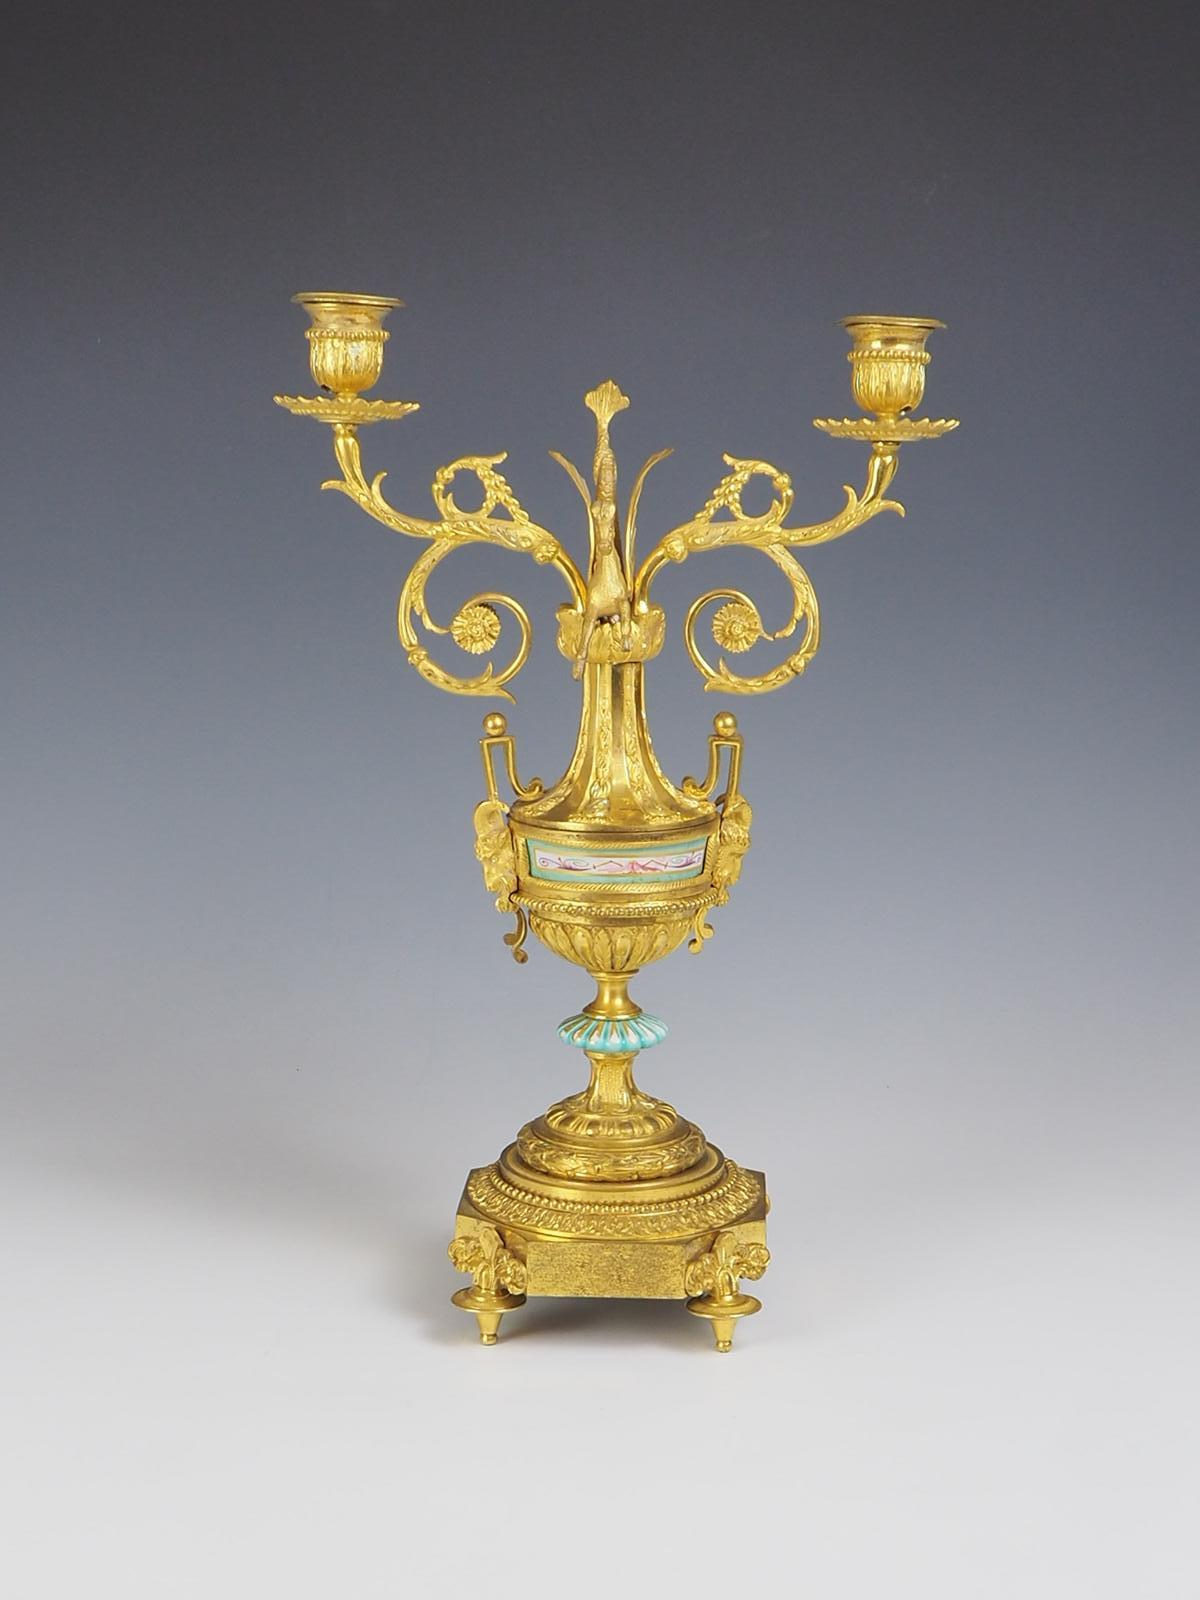 Antique Gilt Bronze Ormolu Candelabra is a truly exquisite piece that exudes elegance and sophistication.

Crafted with meticulous attention to detail, it features intricate horse and scroll details on its four raised feet, adding a touch of